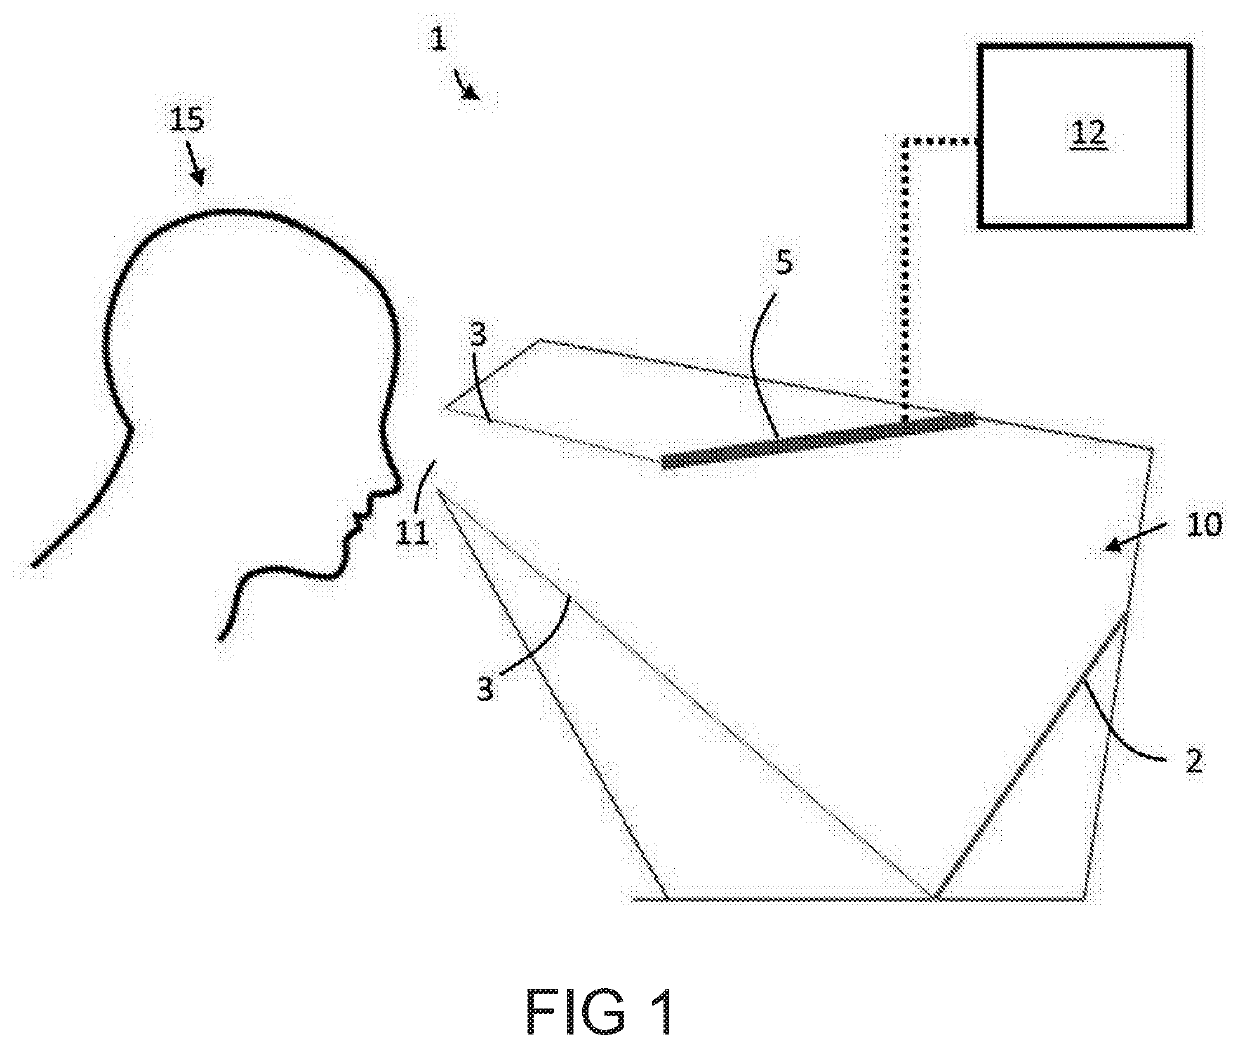 Visual stress assessment device